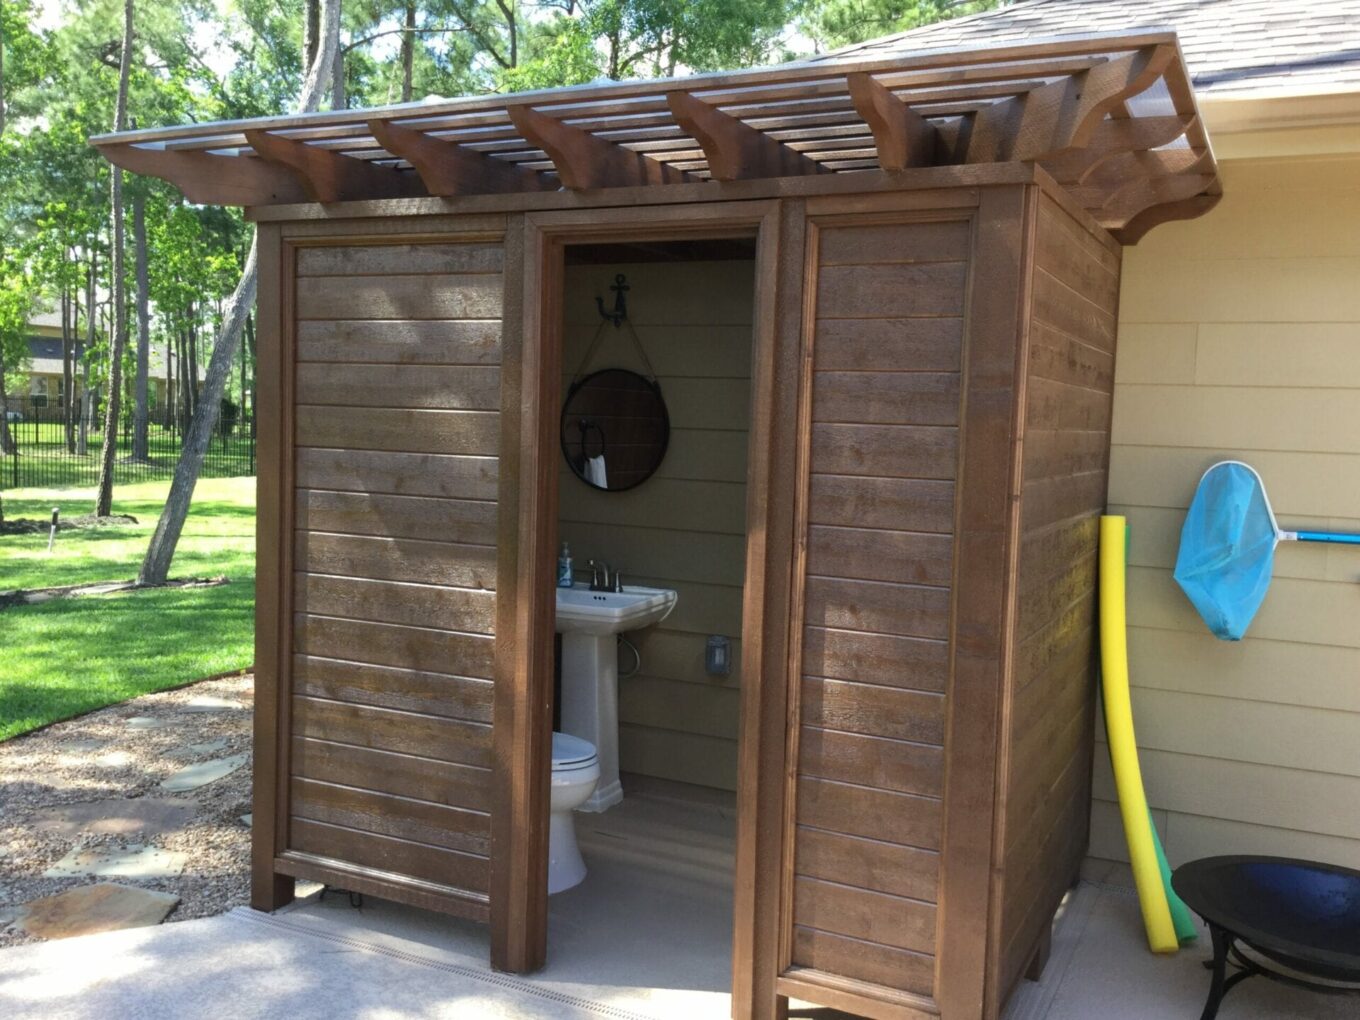 A wooden outhouse with a toilet and sink.